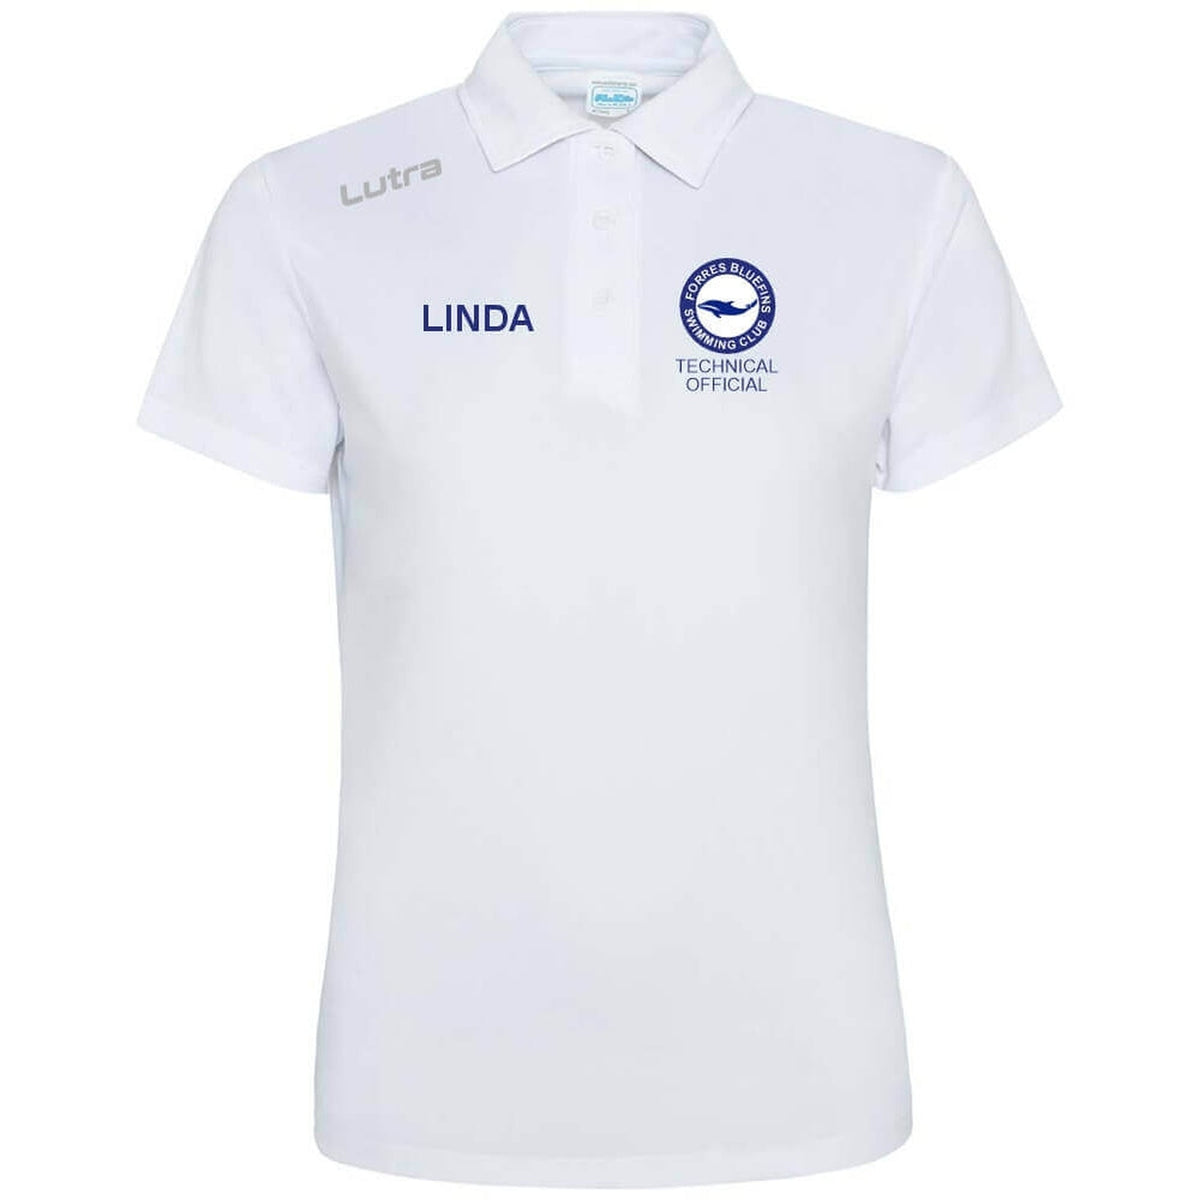 Forres Bluefins SC - 'Lutra' Technical Official' Tech Polo Ladies